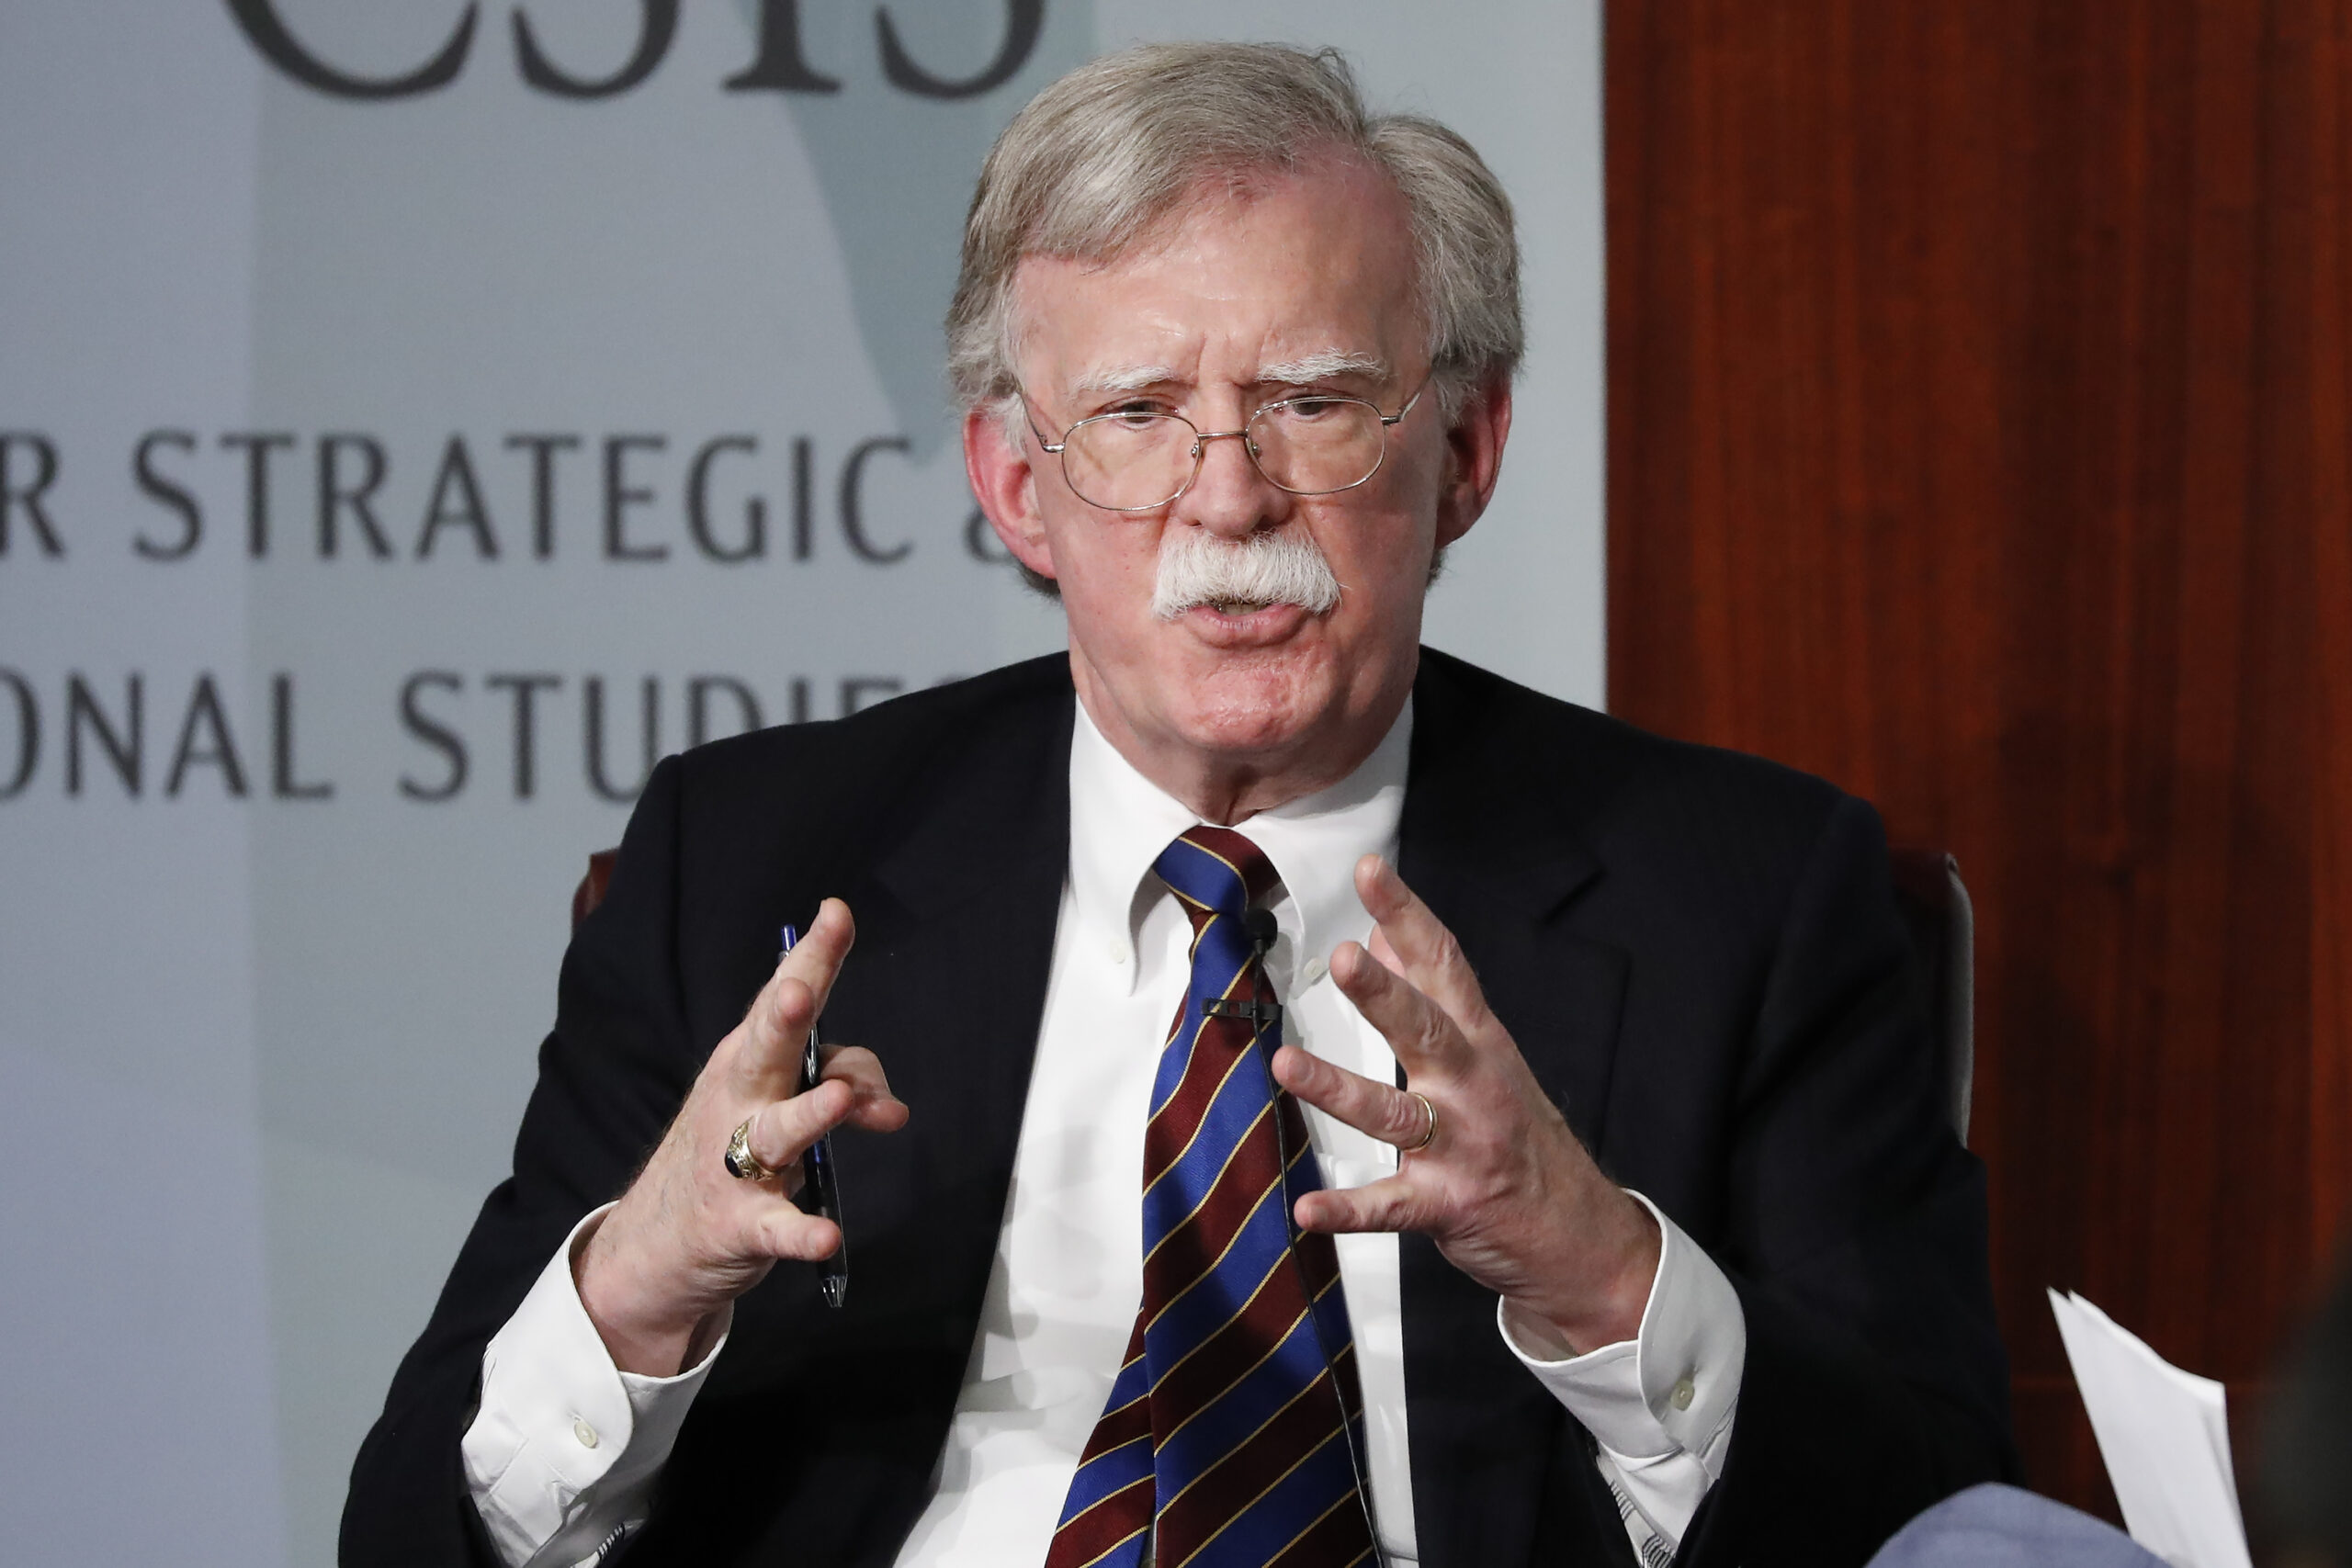 FILE - Former National security adviser John Bolton gestures while speaking at the Center for Strategic and International Studies (CSIS) in Washington, Sept. 30, 2019. The Justice Department says an Iranian operative has been charged in a plot to murder former Trump administration national security John Bolton. (AP Photo/Pablo Martinez Monsivais, File)